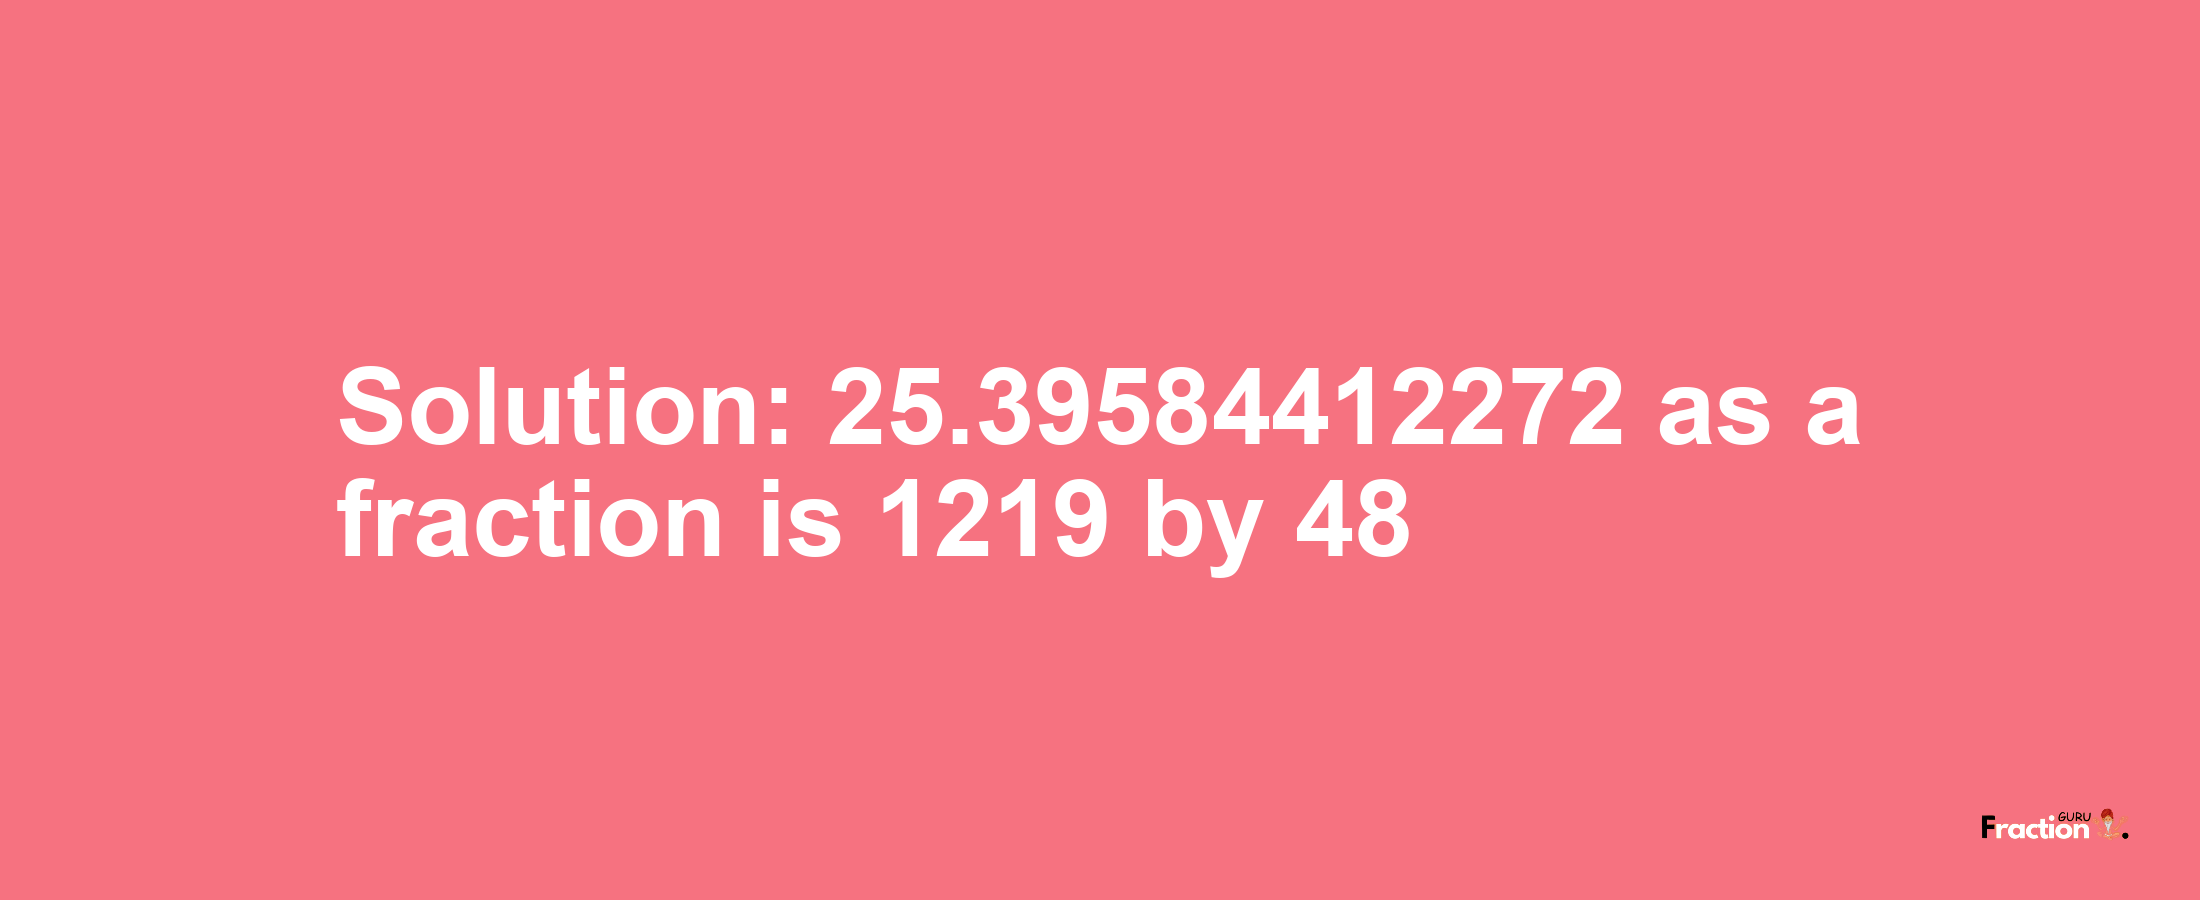 Solution:25.39584412272 as a fraction is 1219/48